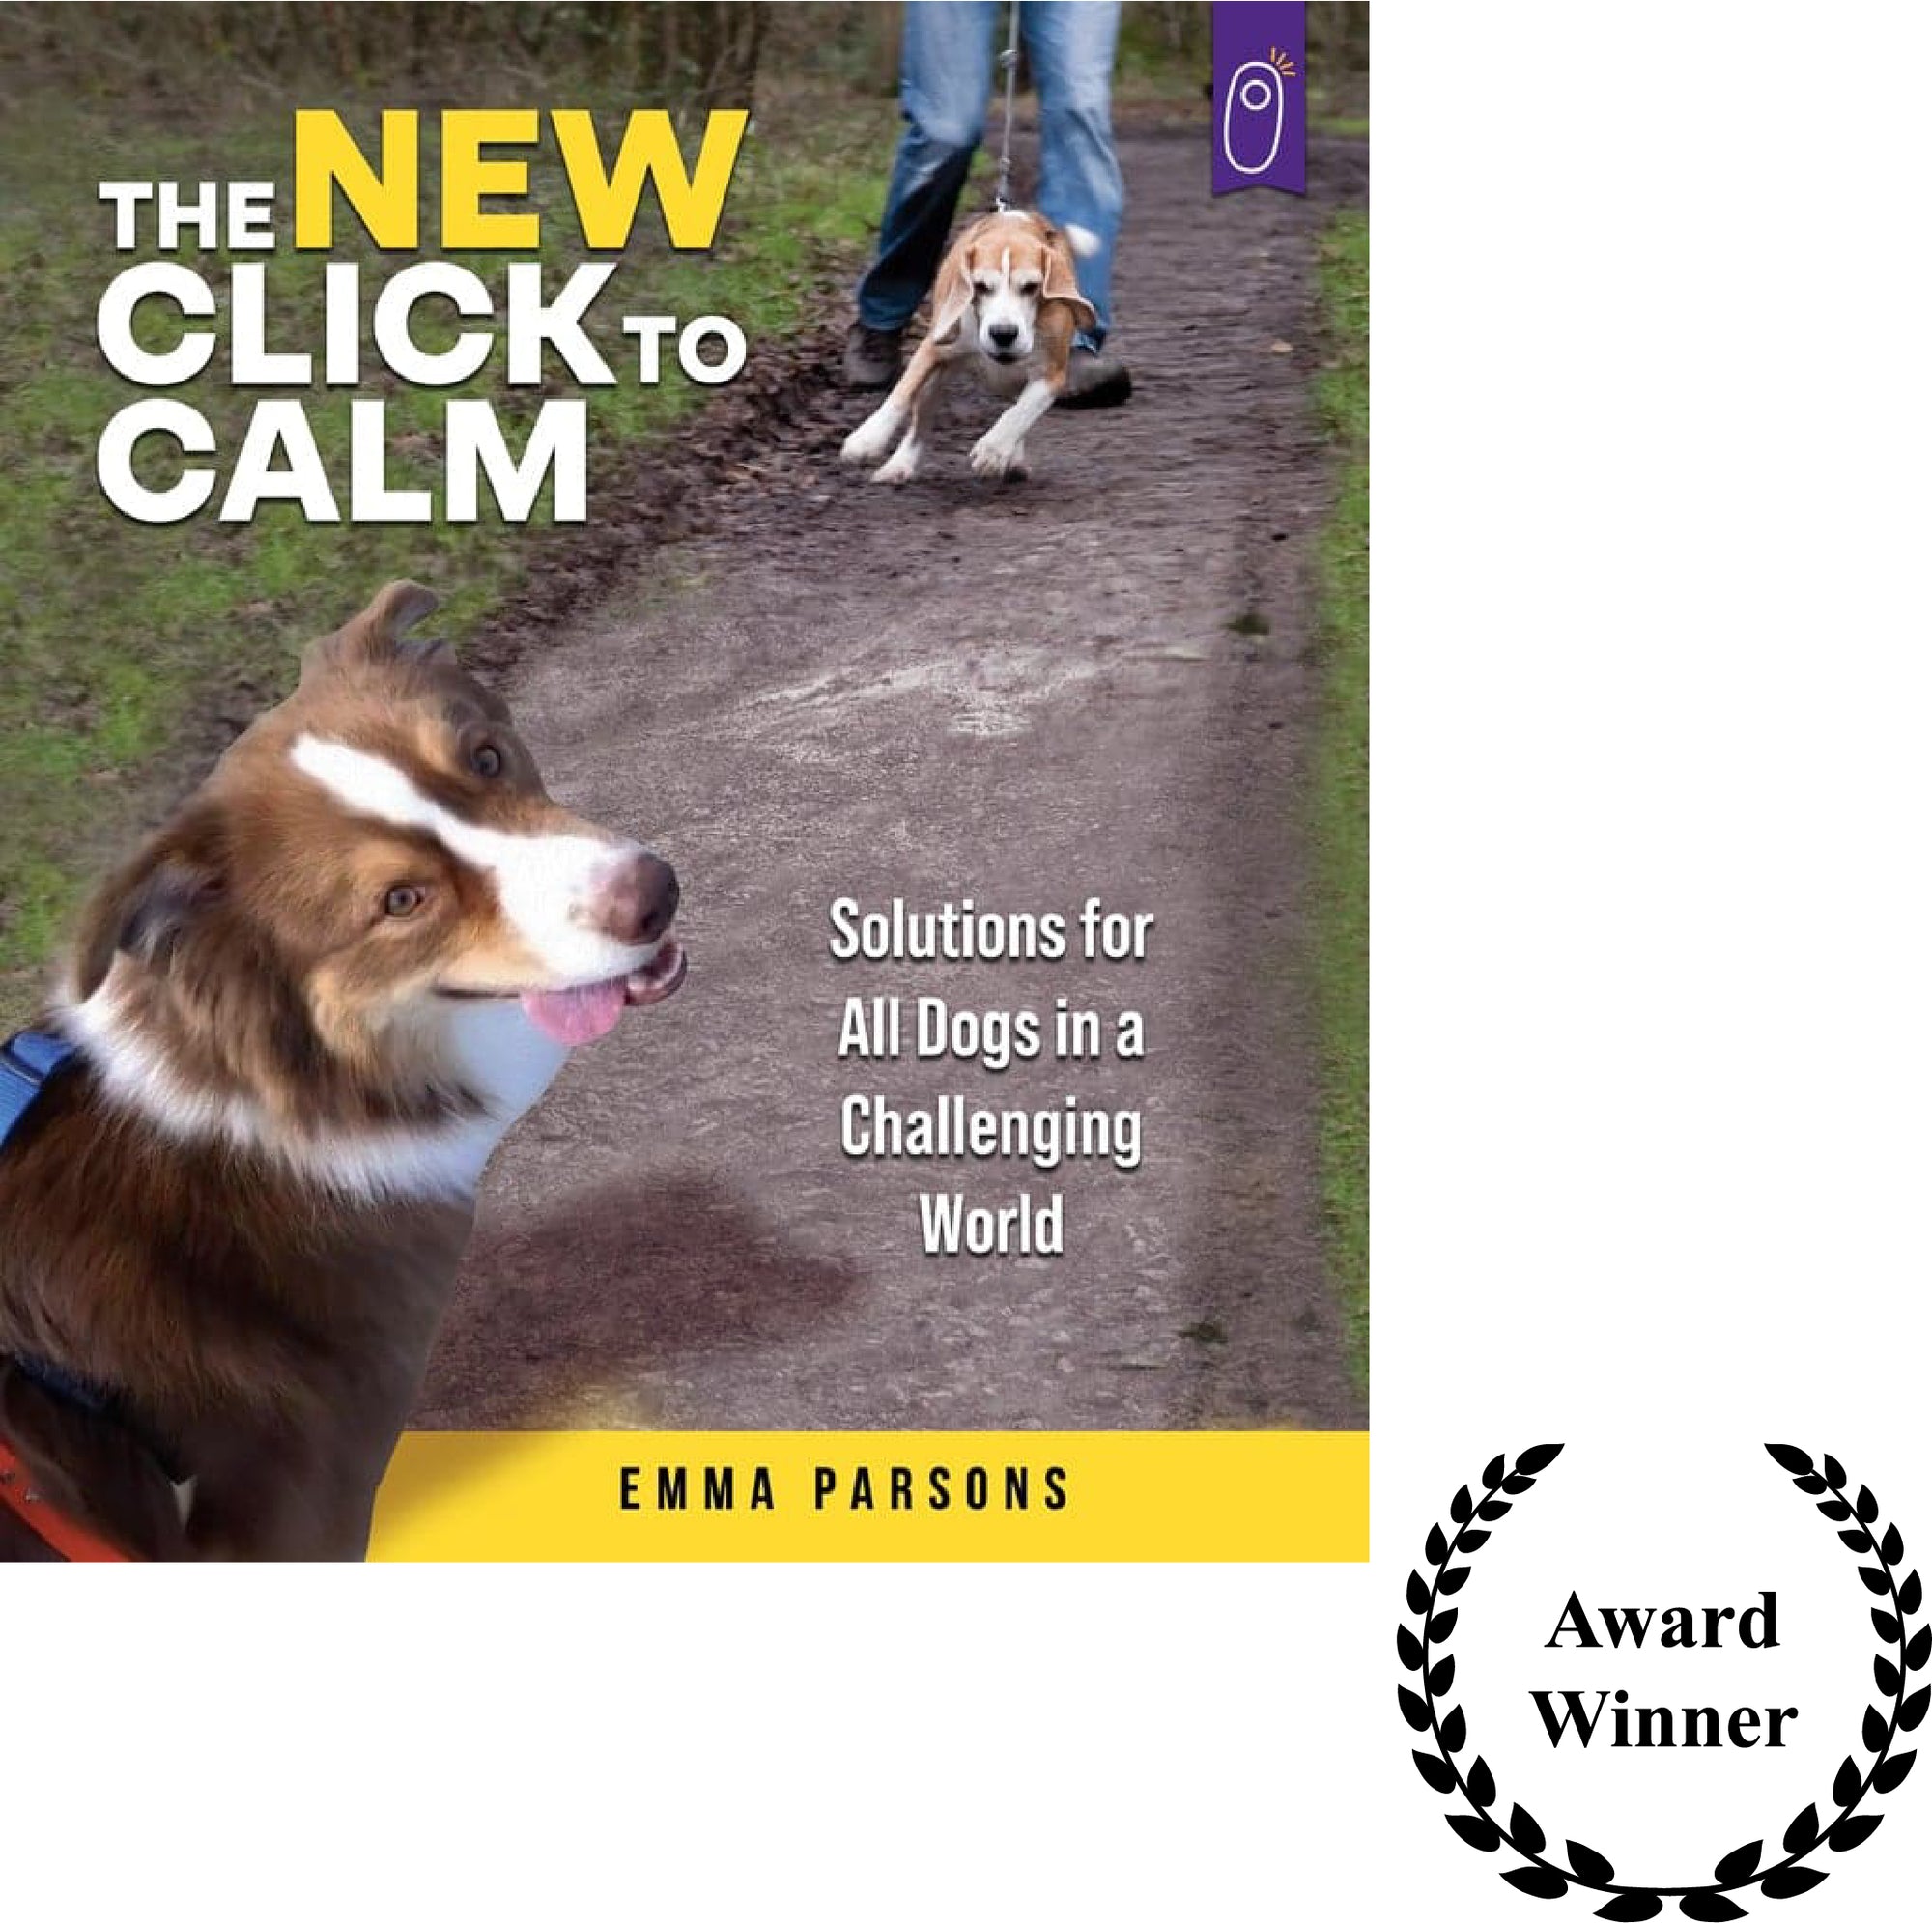 The New Click to Calm: Solutions for All Dogs in a Challenging World by Emma Parsons